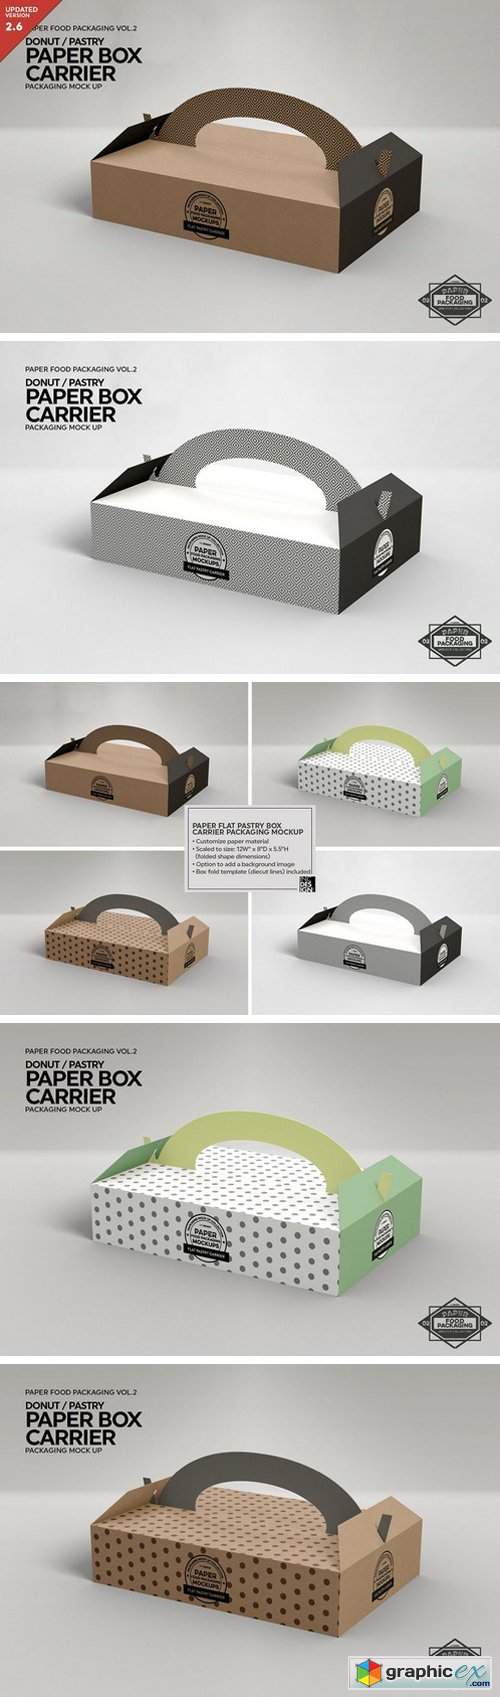 Pastry Donut Box Carrier Mockup